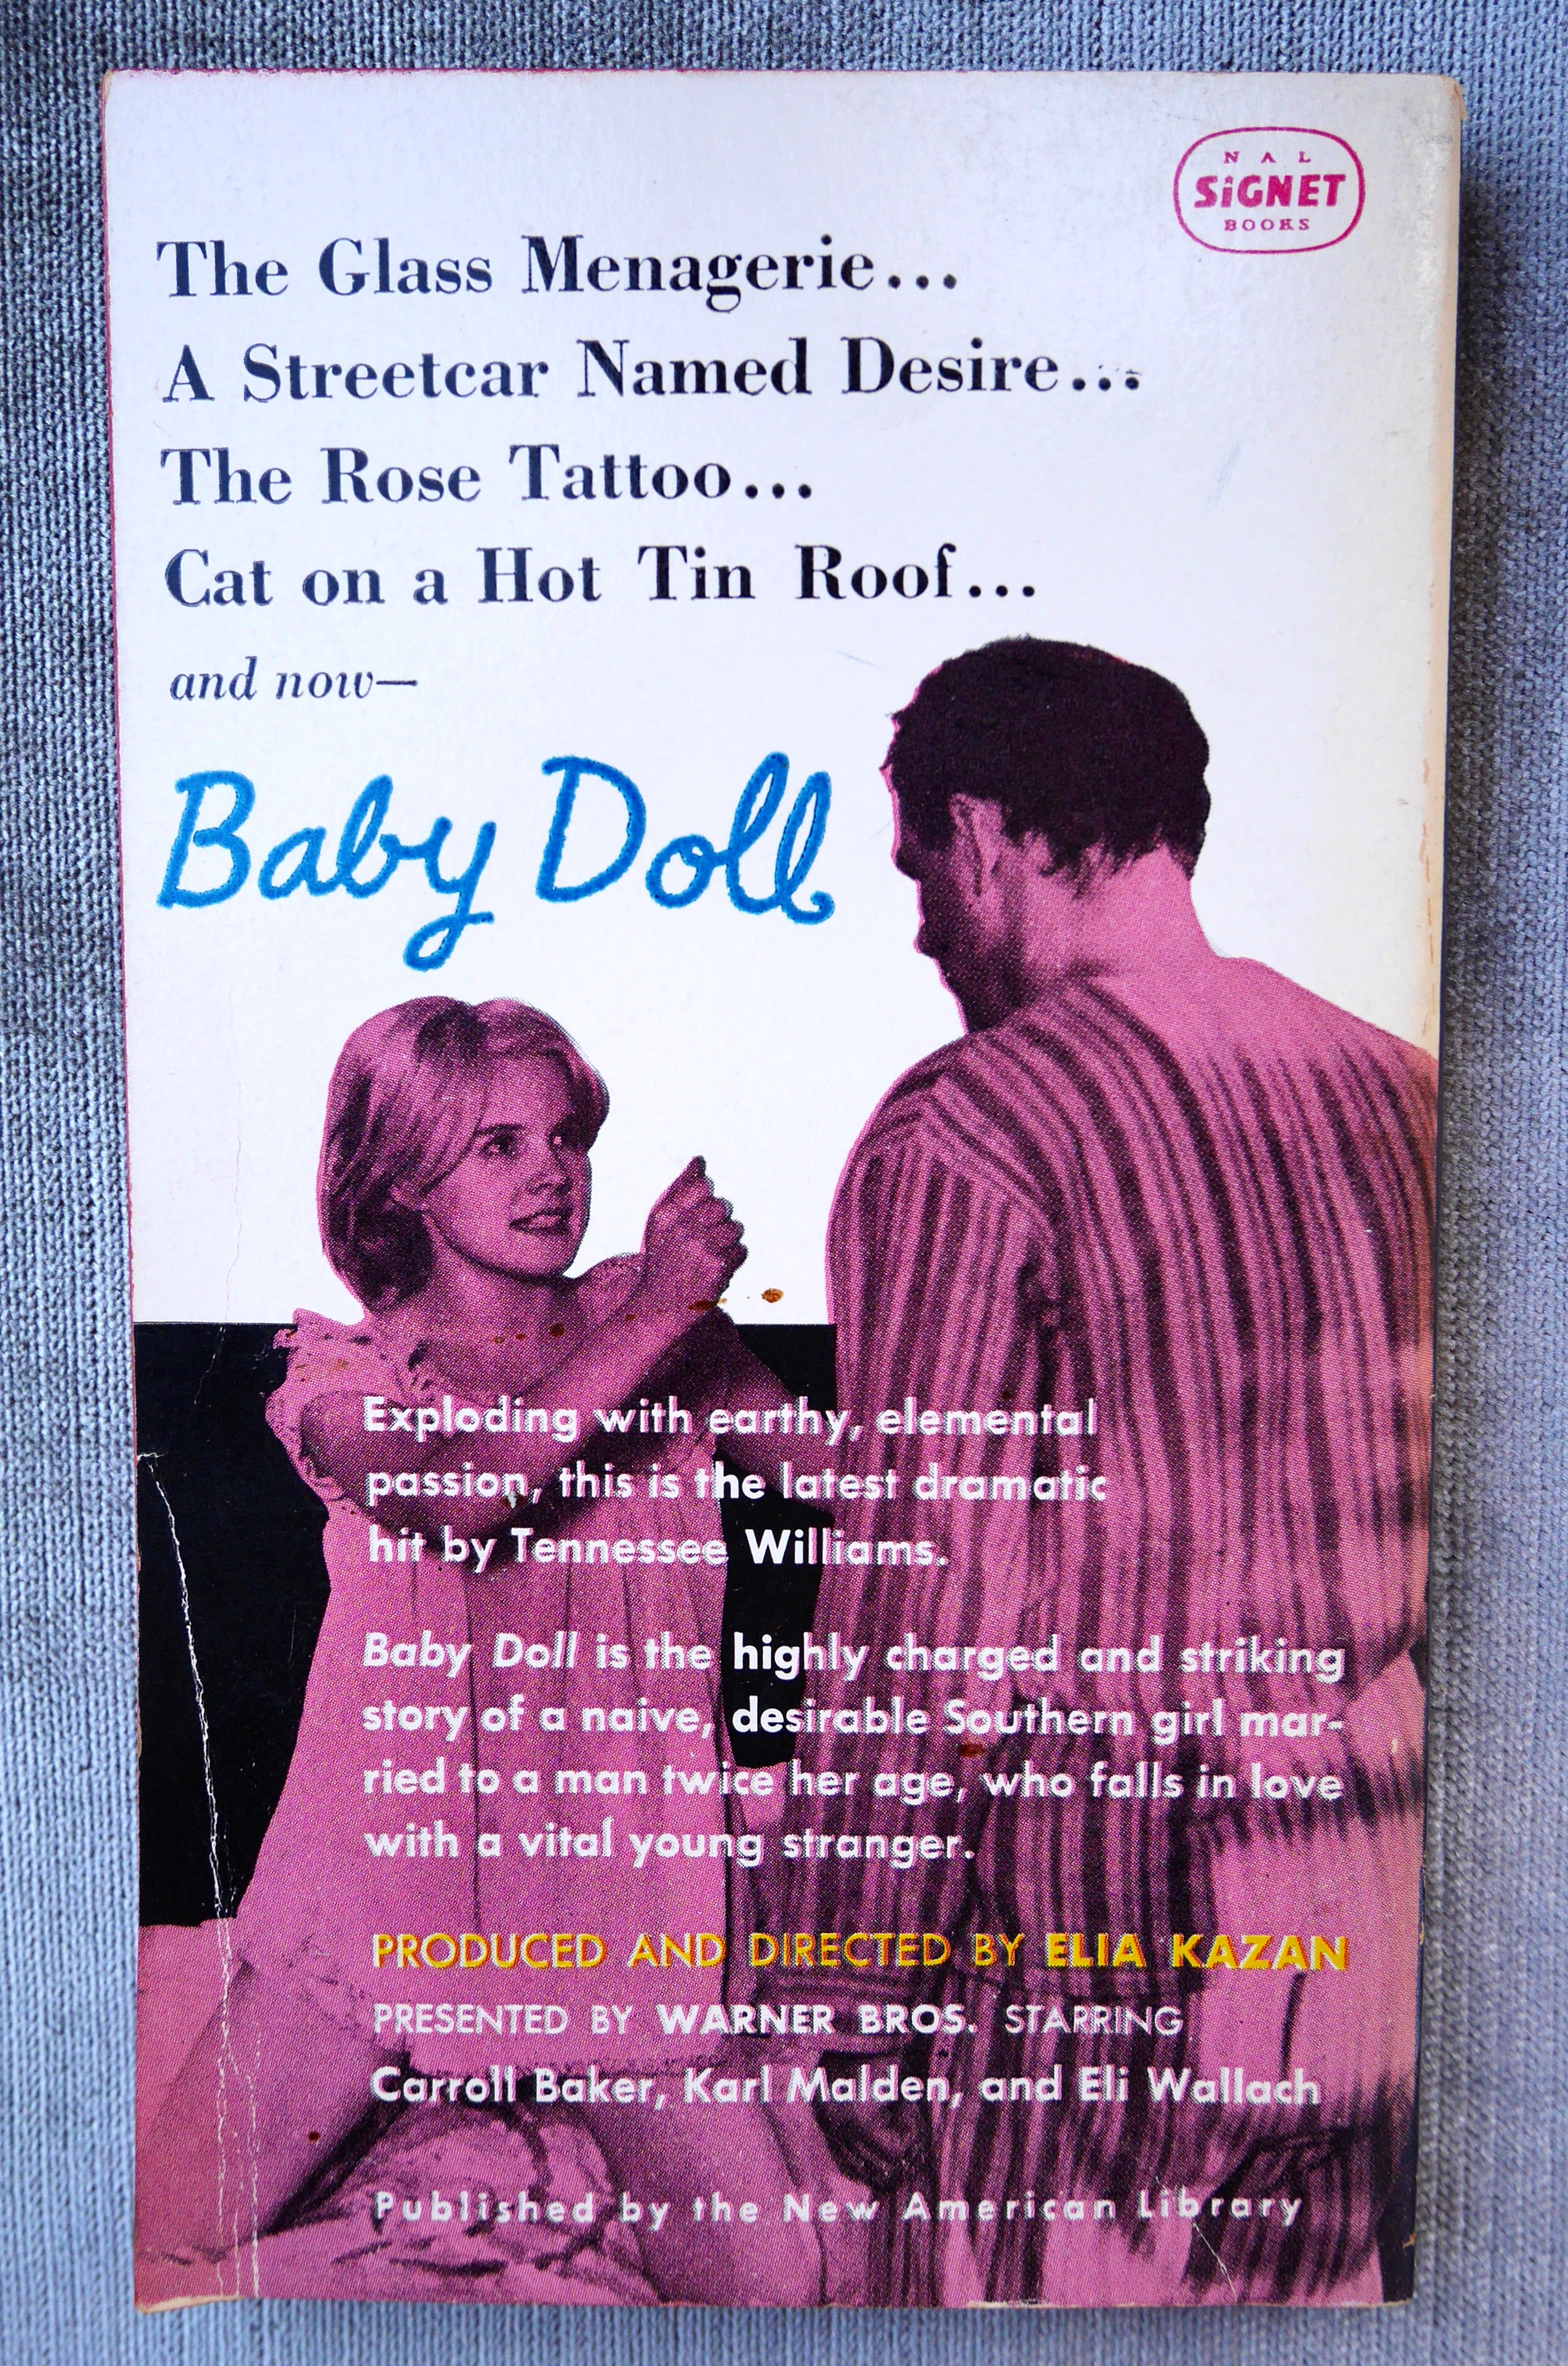 Tennessee Williams, Baby Doll, Signet Books, 1956, Movie Tie-In Paperback